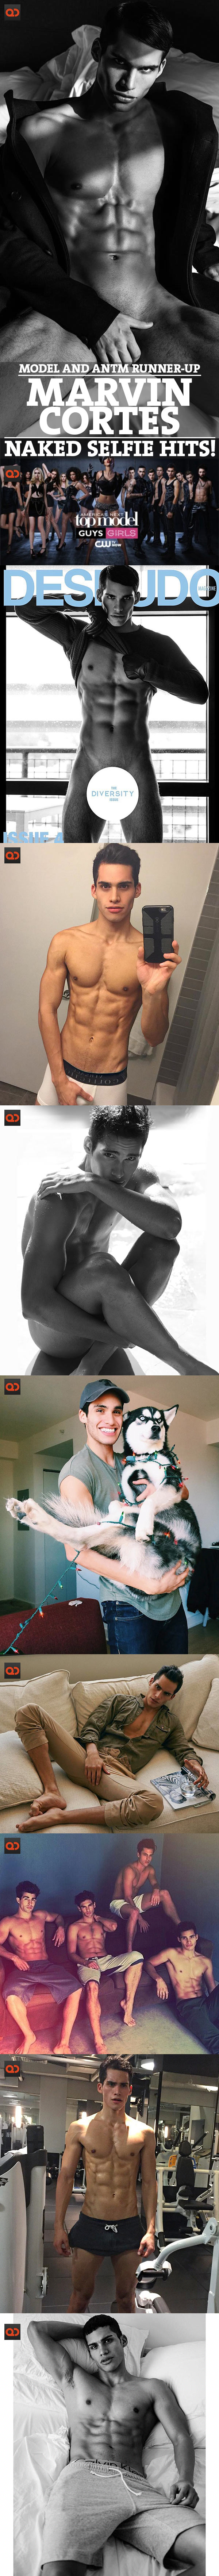 Marvin Cortes, Model And ANTM Runner-Up, Naked Selfie Hits!